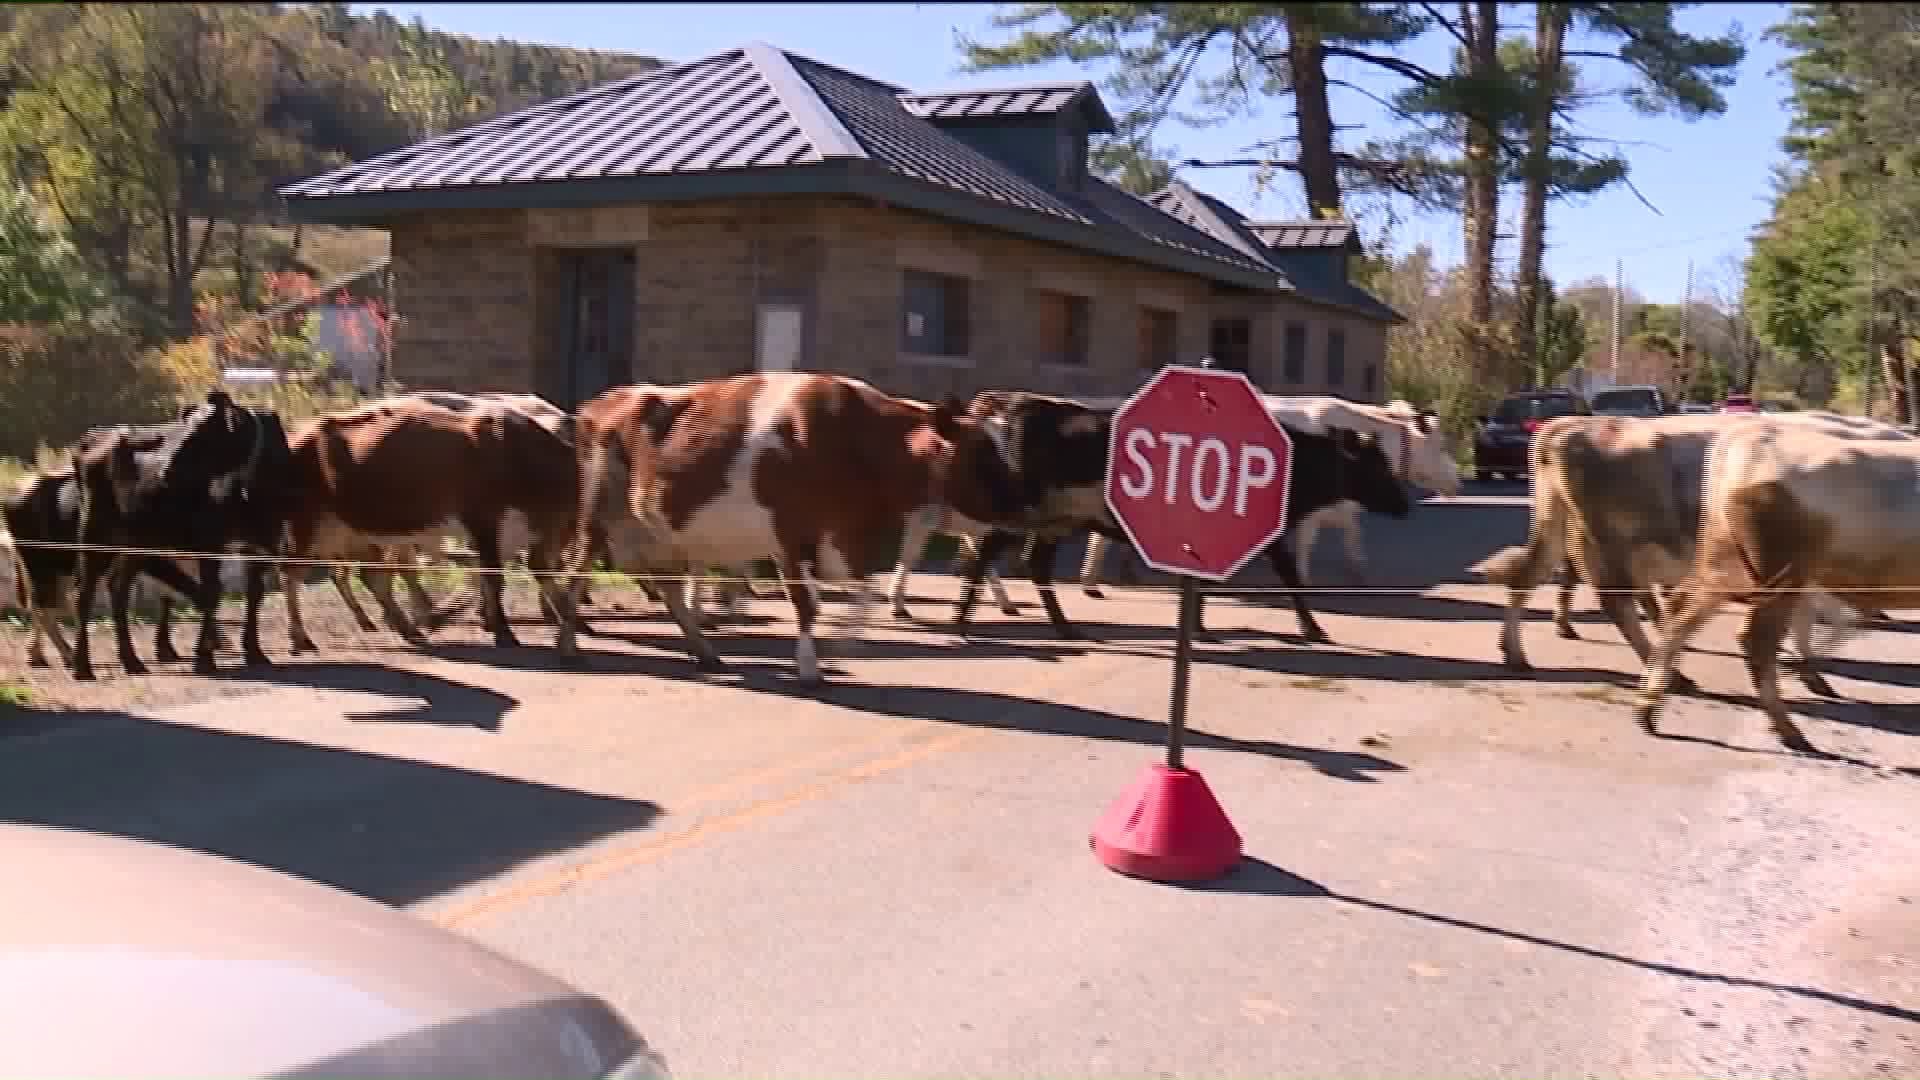 The Lands At Hillside Farms Raising Money For New, State-Of-The Art Cow Barn